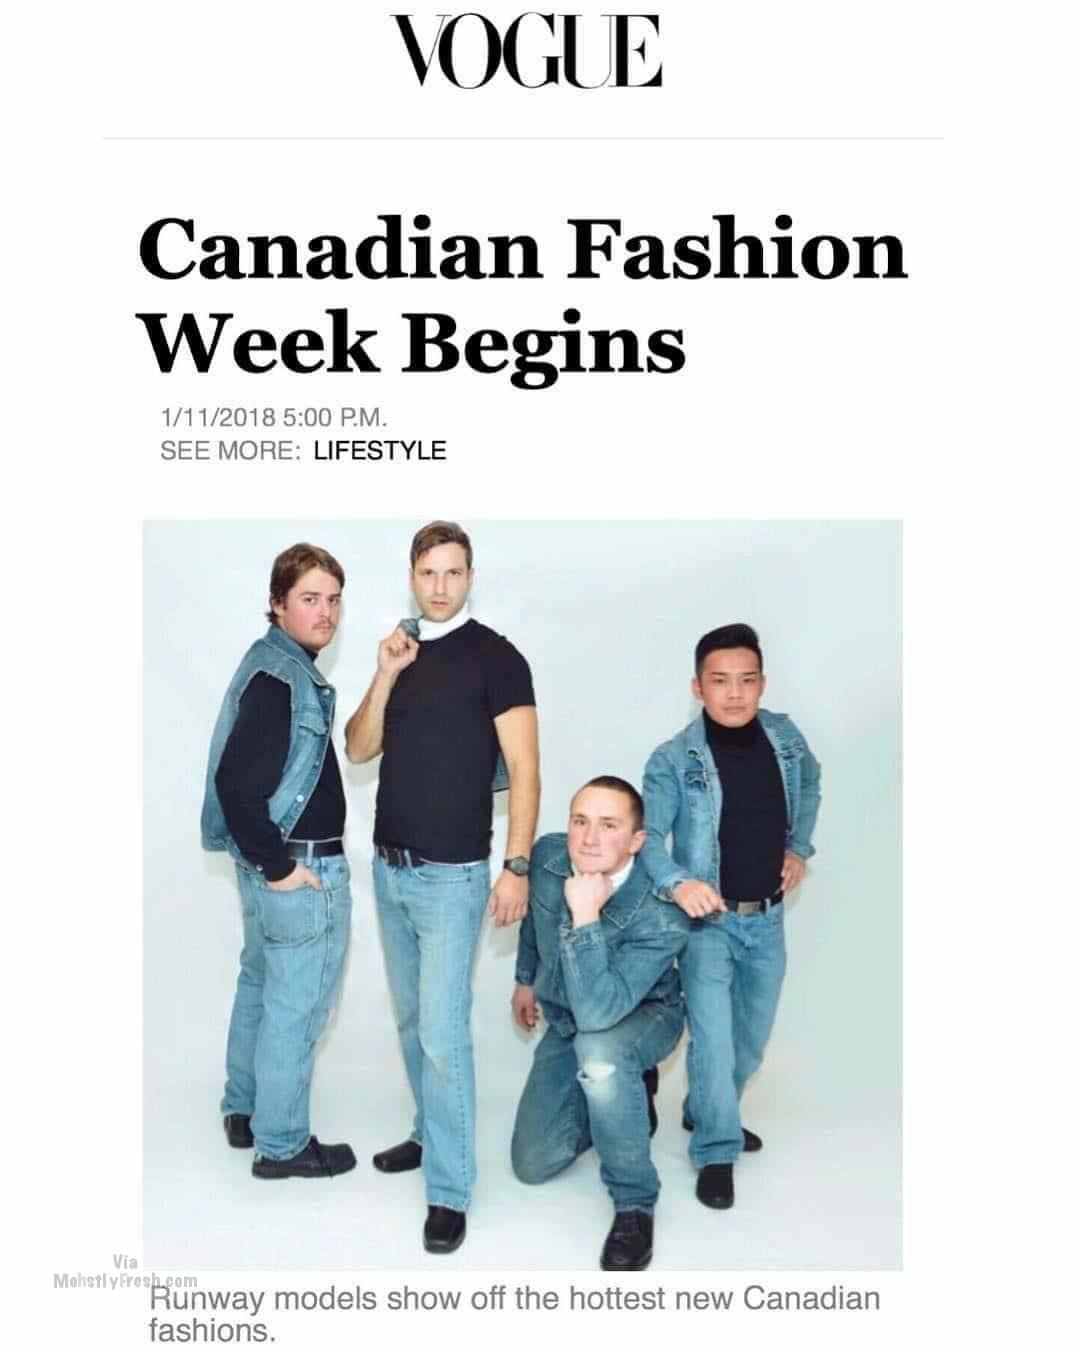 memes - human behavior - Vogue Canadian Fashion Week Begins 1112018 . See More Lifestyle Via Mohstly Fresh.com Runway models show off the hottest new Canadian fashions.